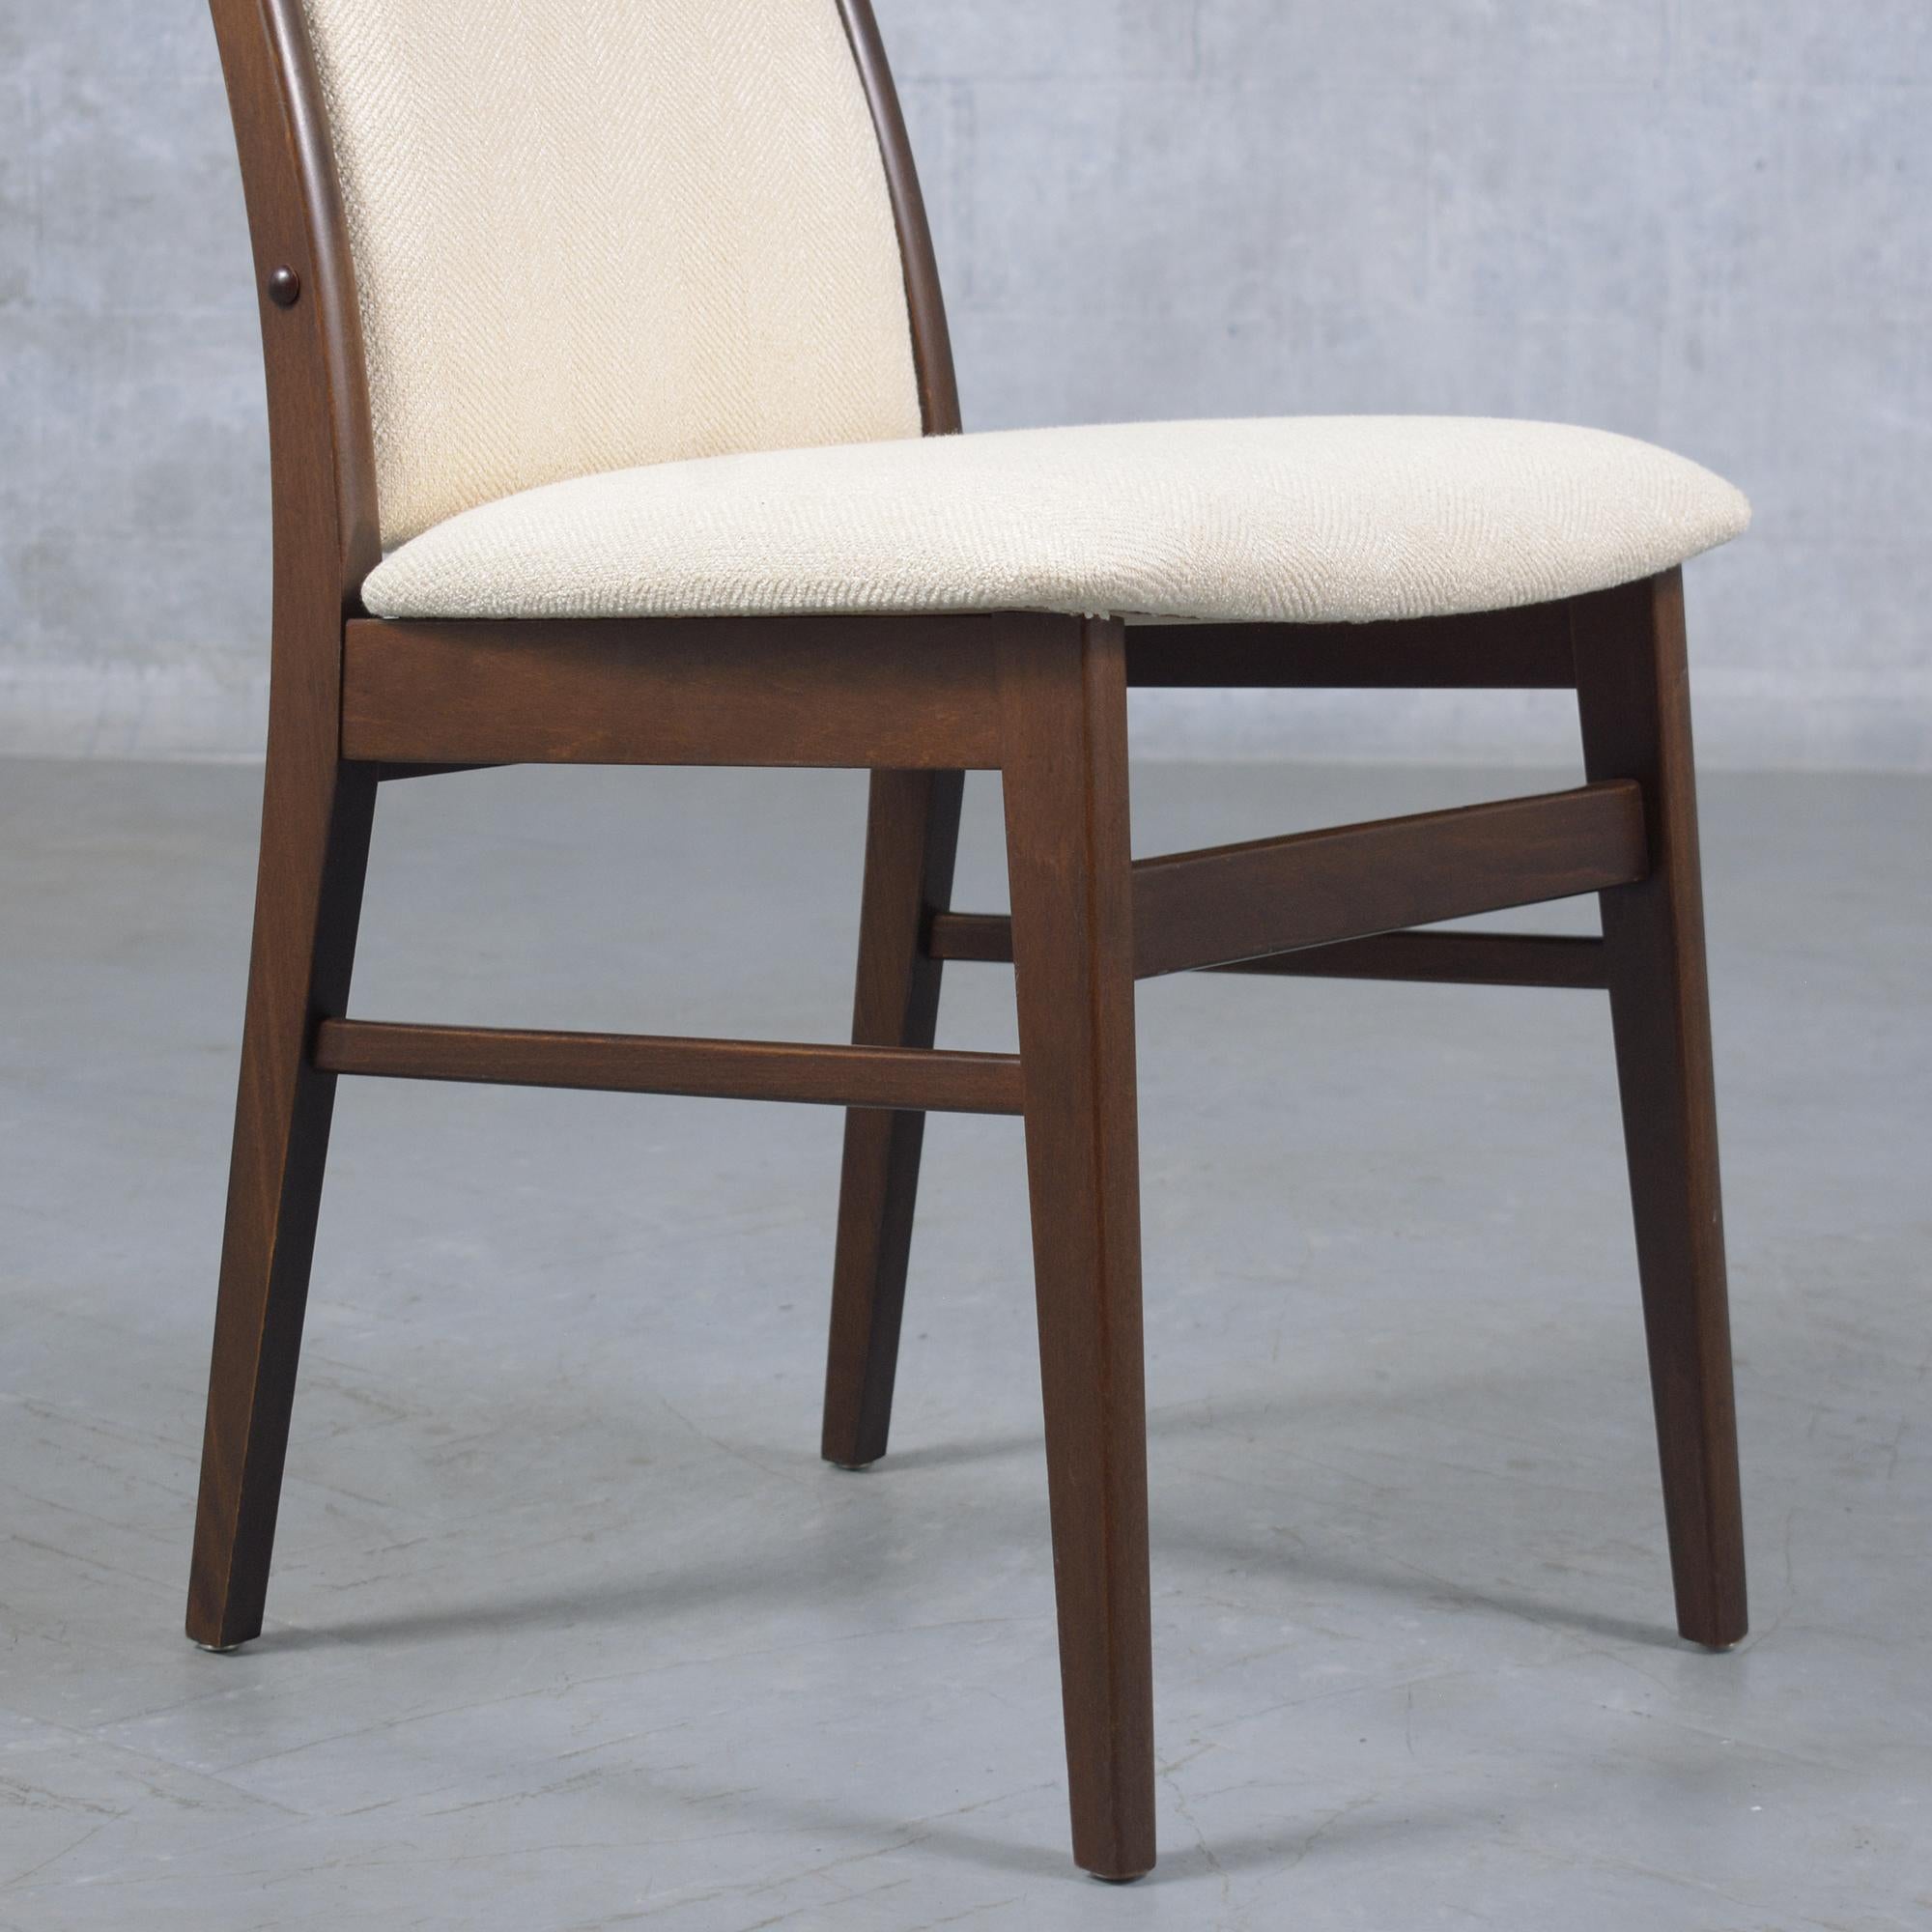 Exquisite Danish Teak Dining Chairs, Restored and Refined For Sale 4